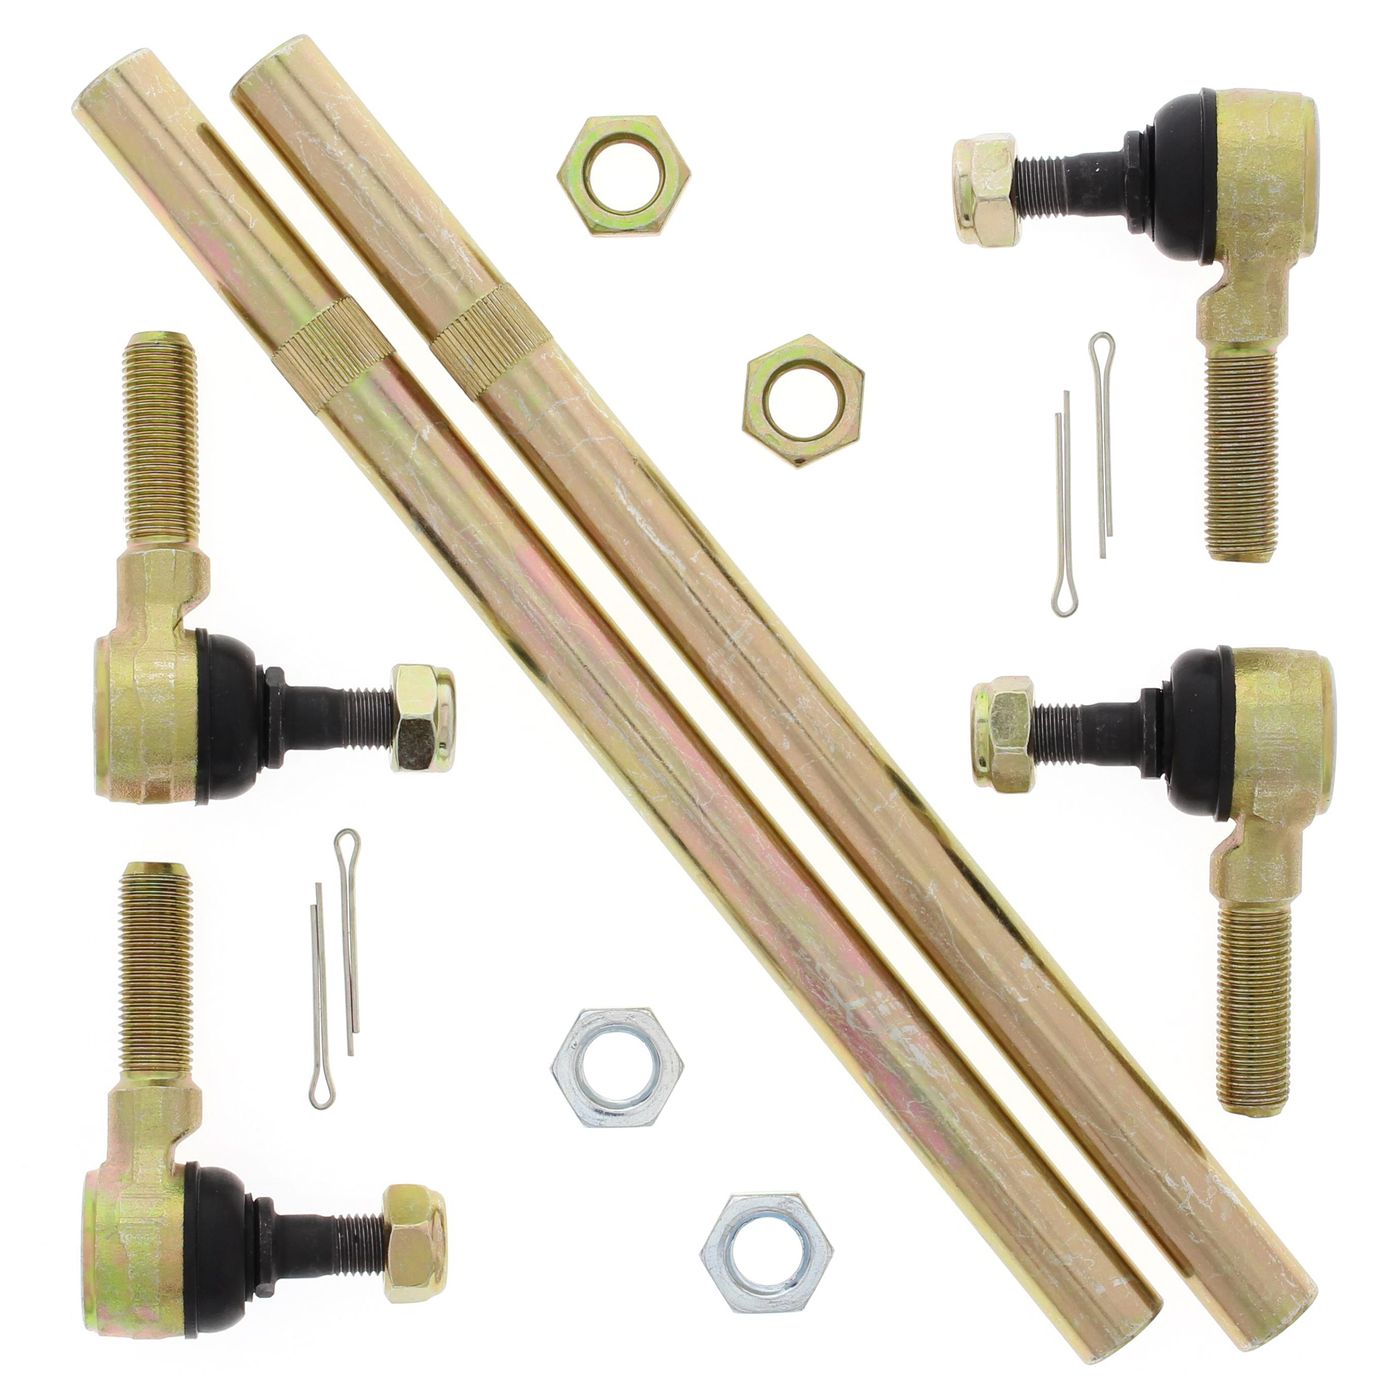 Wrp Tie Rod Kits - WRP521012 image